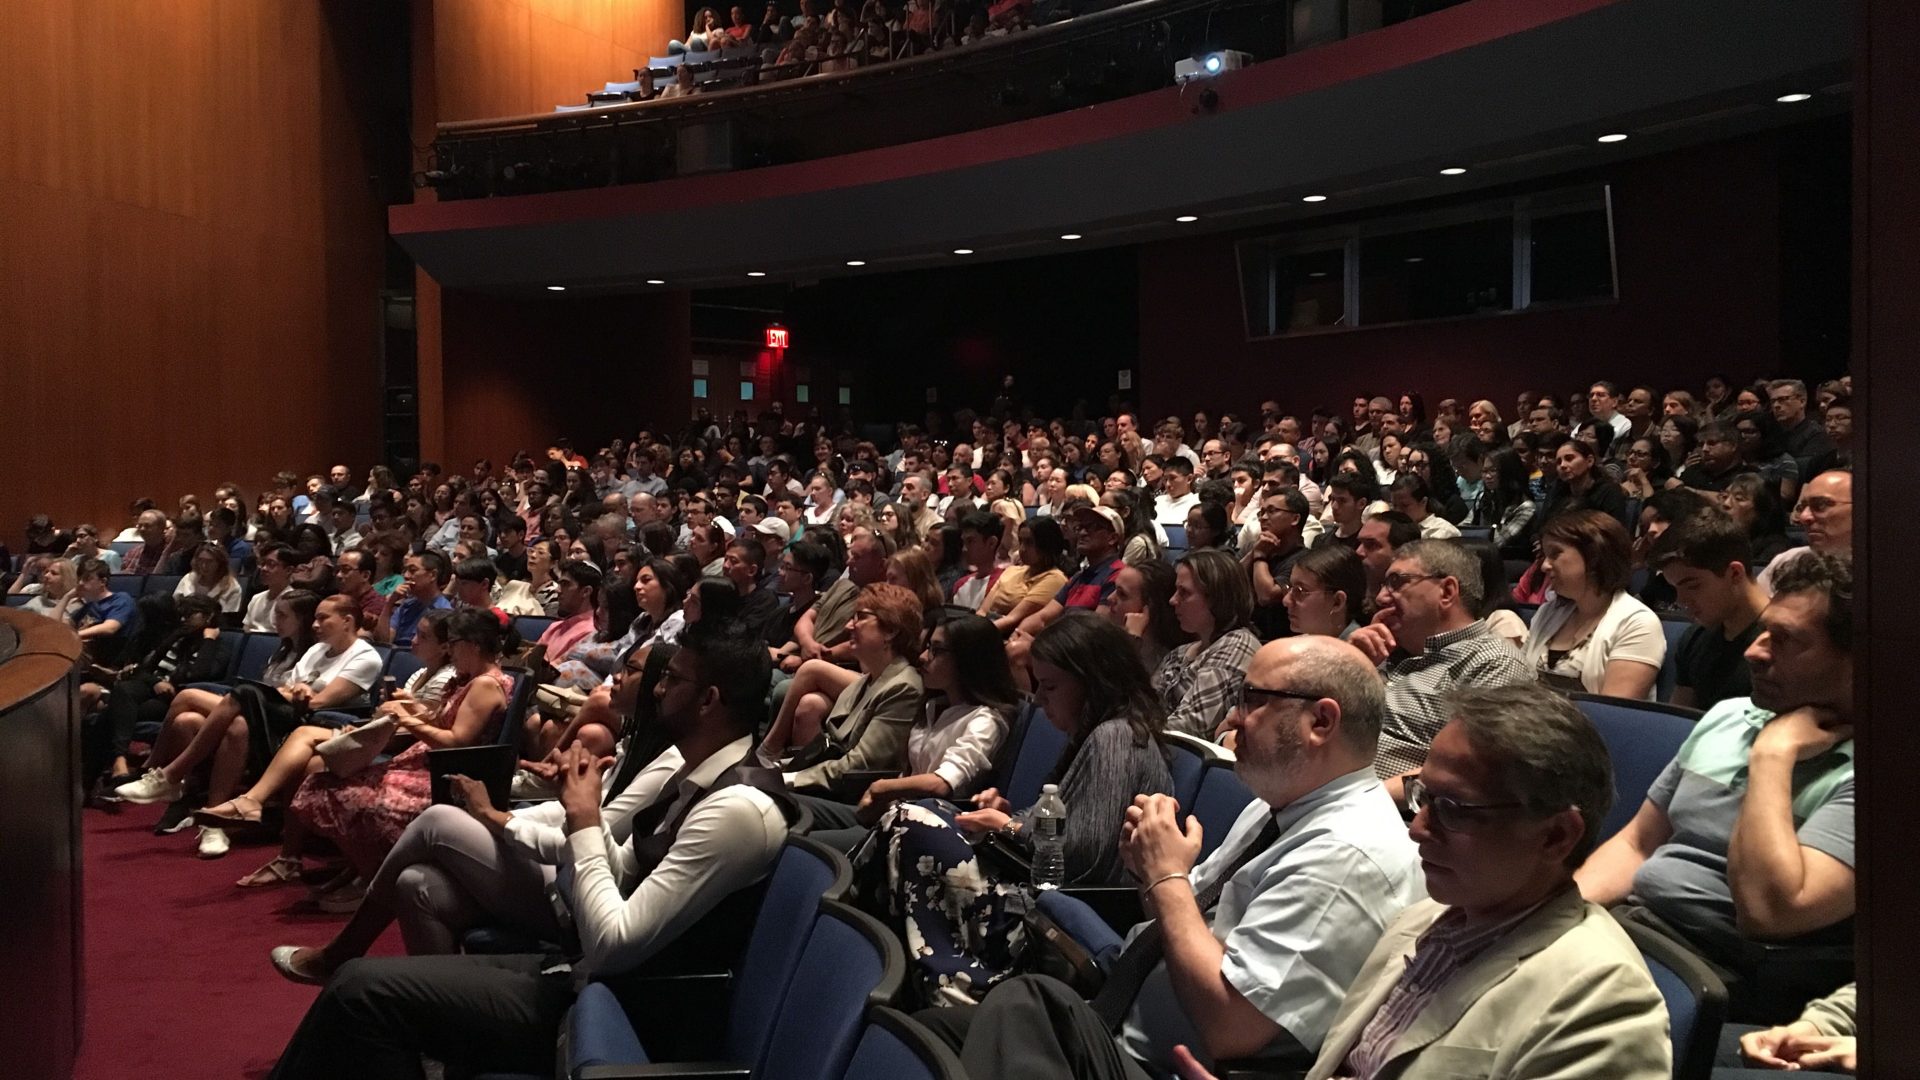 Prospective students and families attend Macaulay open house event at John Jay College Gerald Lynch Theater.